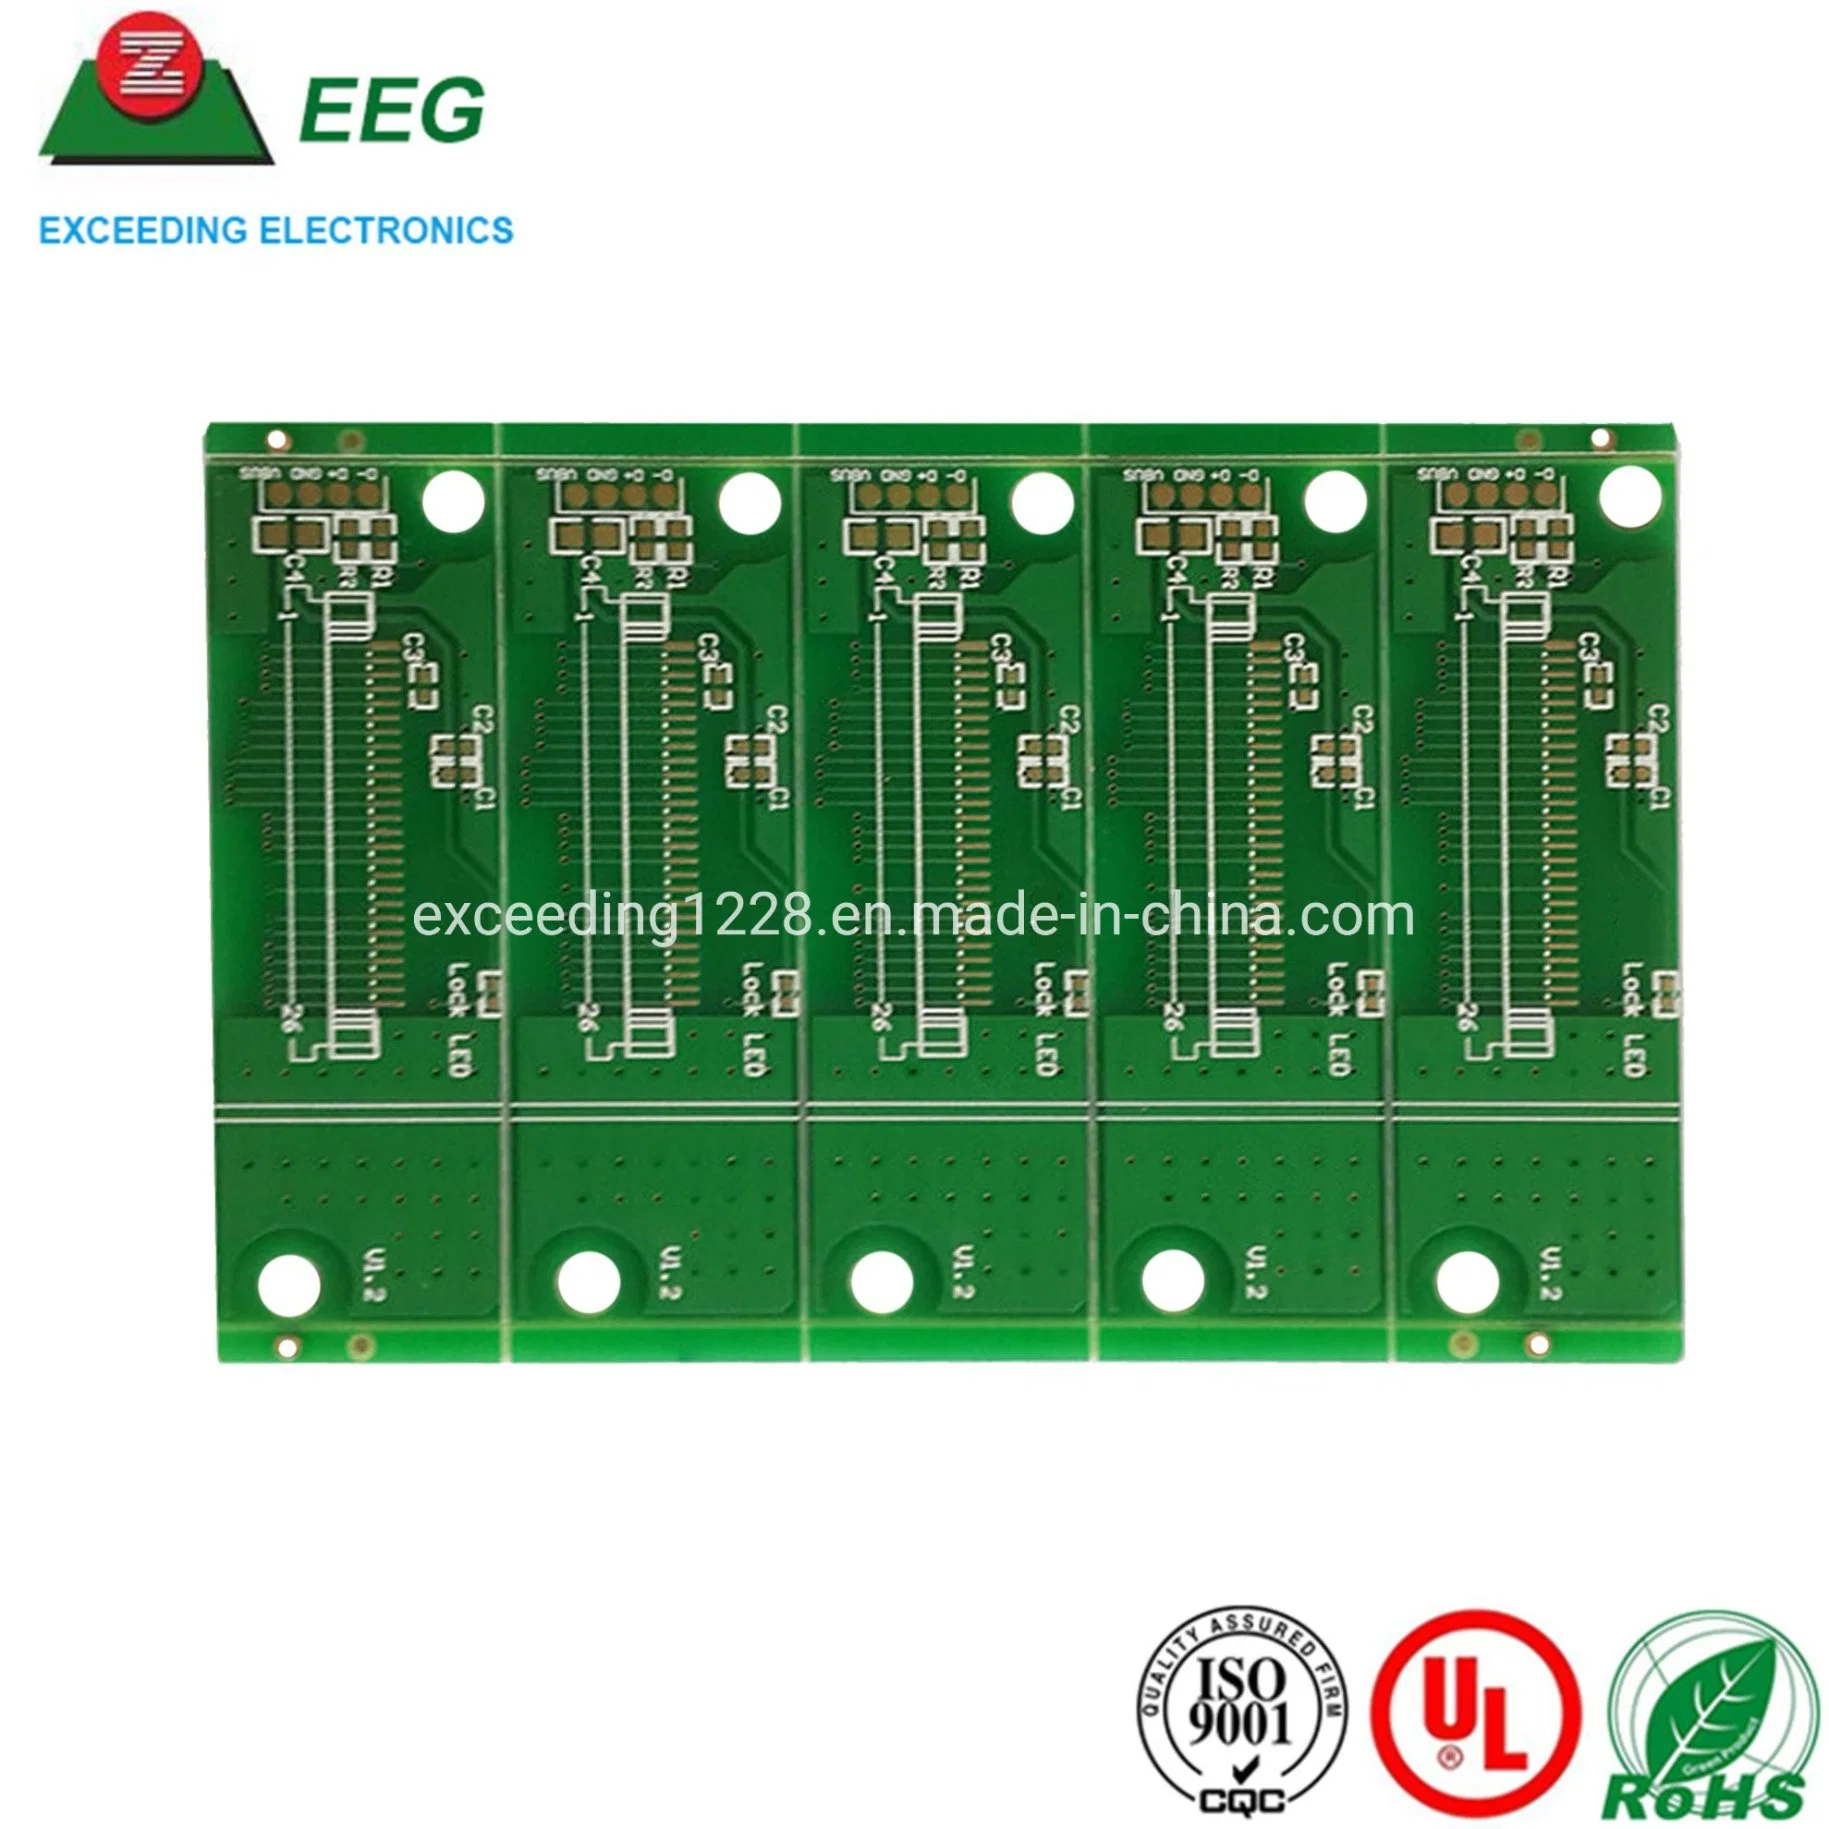 PCB Motherboard Printed Circuit Board PCB for Electronics Multilayer PCB Manufacturing Services